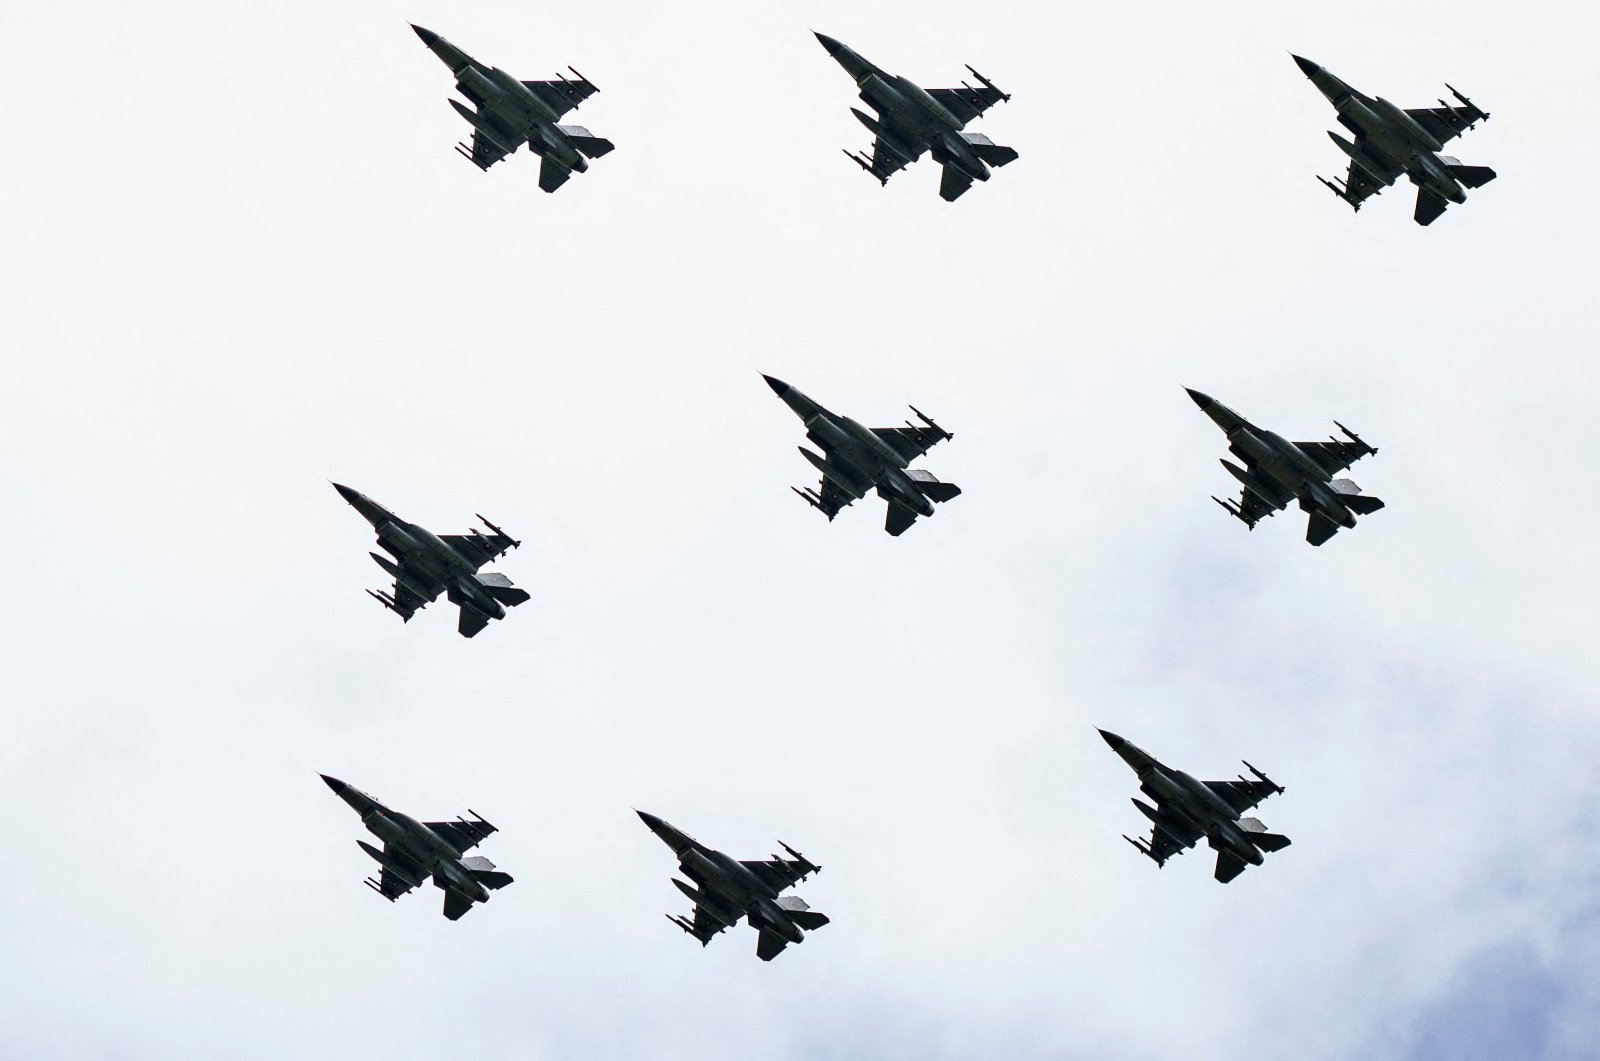 F-16 aircraft fly past in the Danish Air Show at Karup Airport, in Karup, Denmark, June 19, 2022. (Reuters Photo)